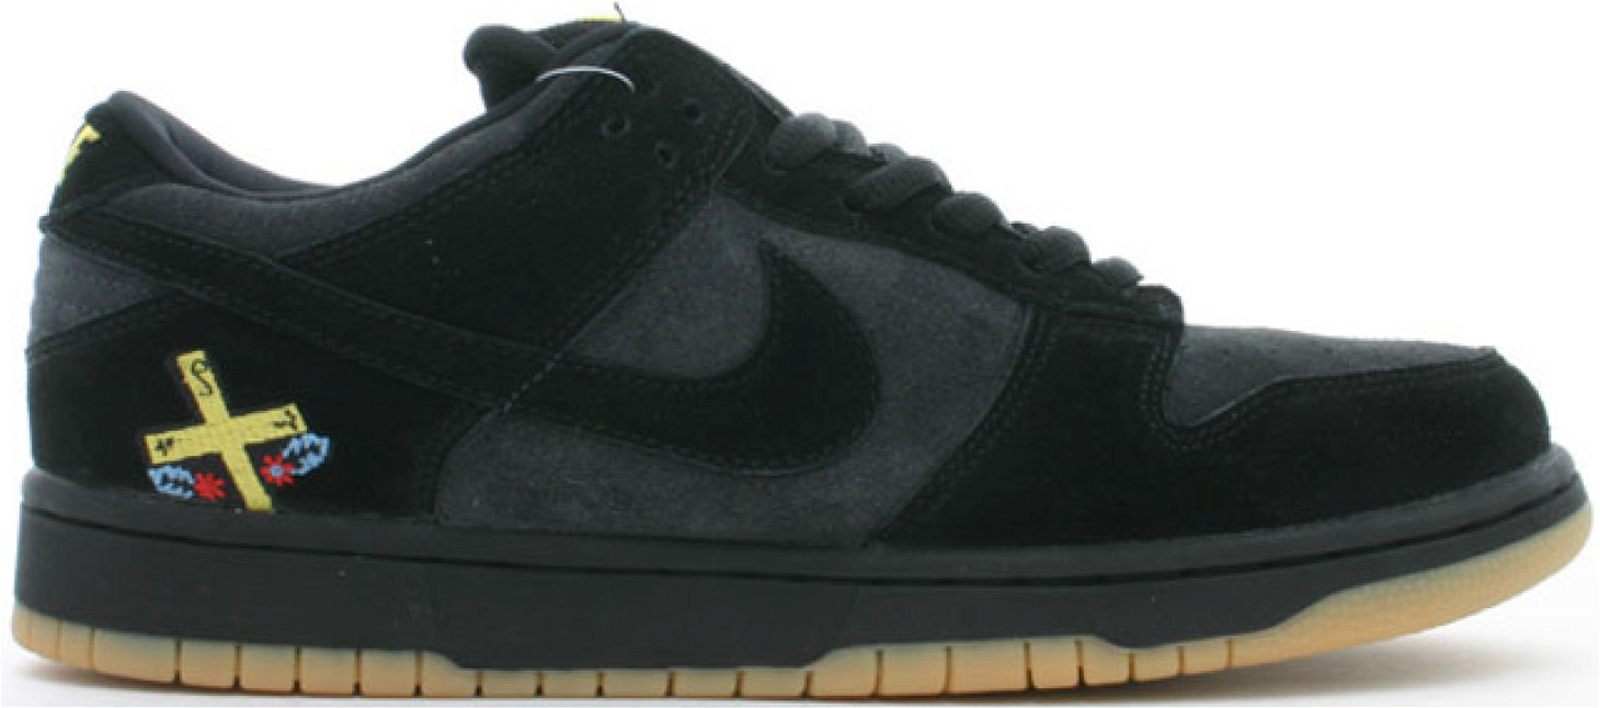 Nike Dunk Low SP Chocolate sneakers